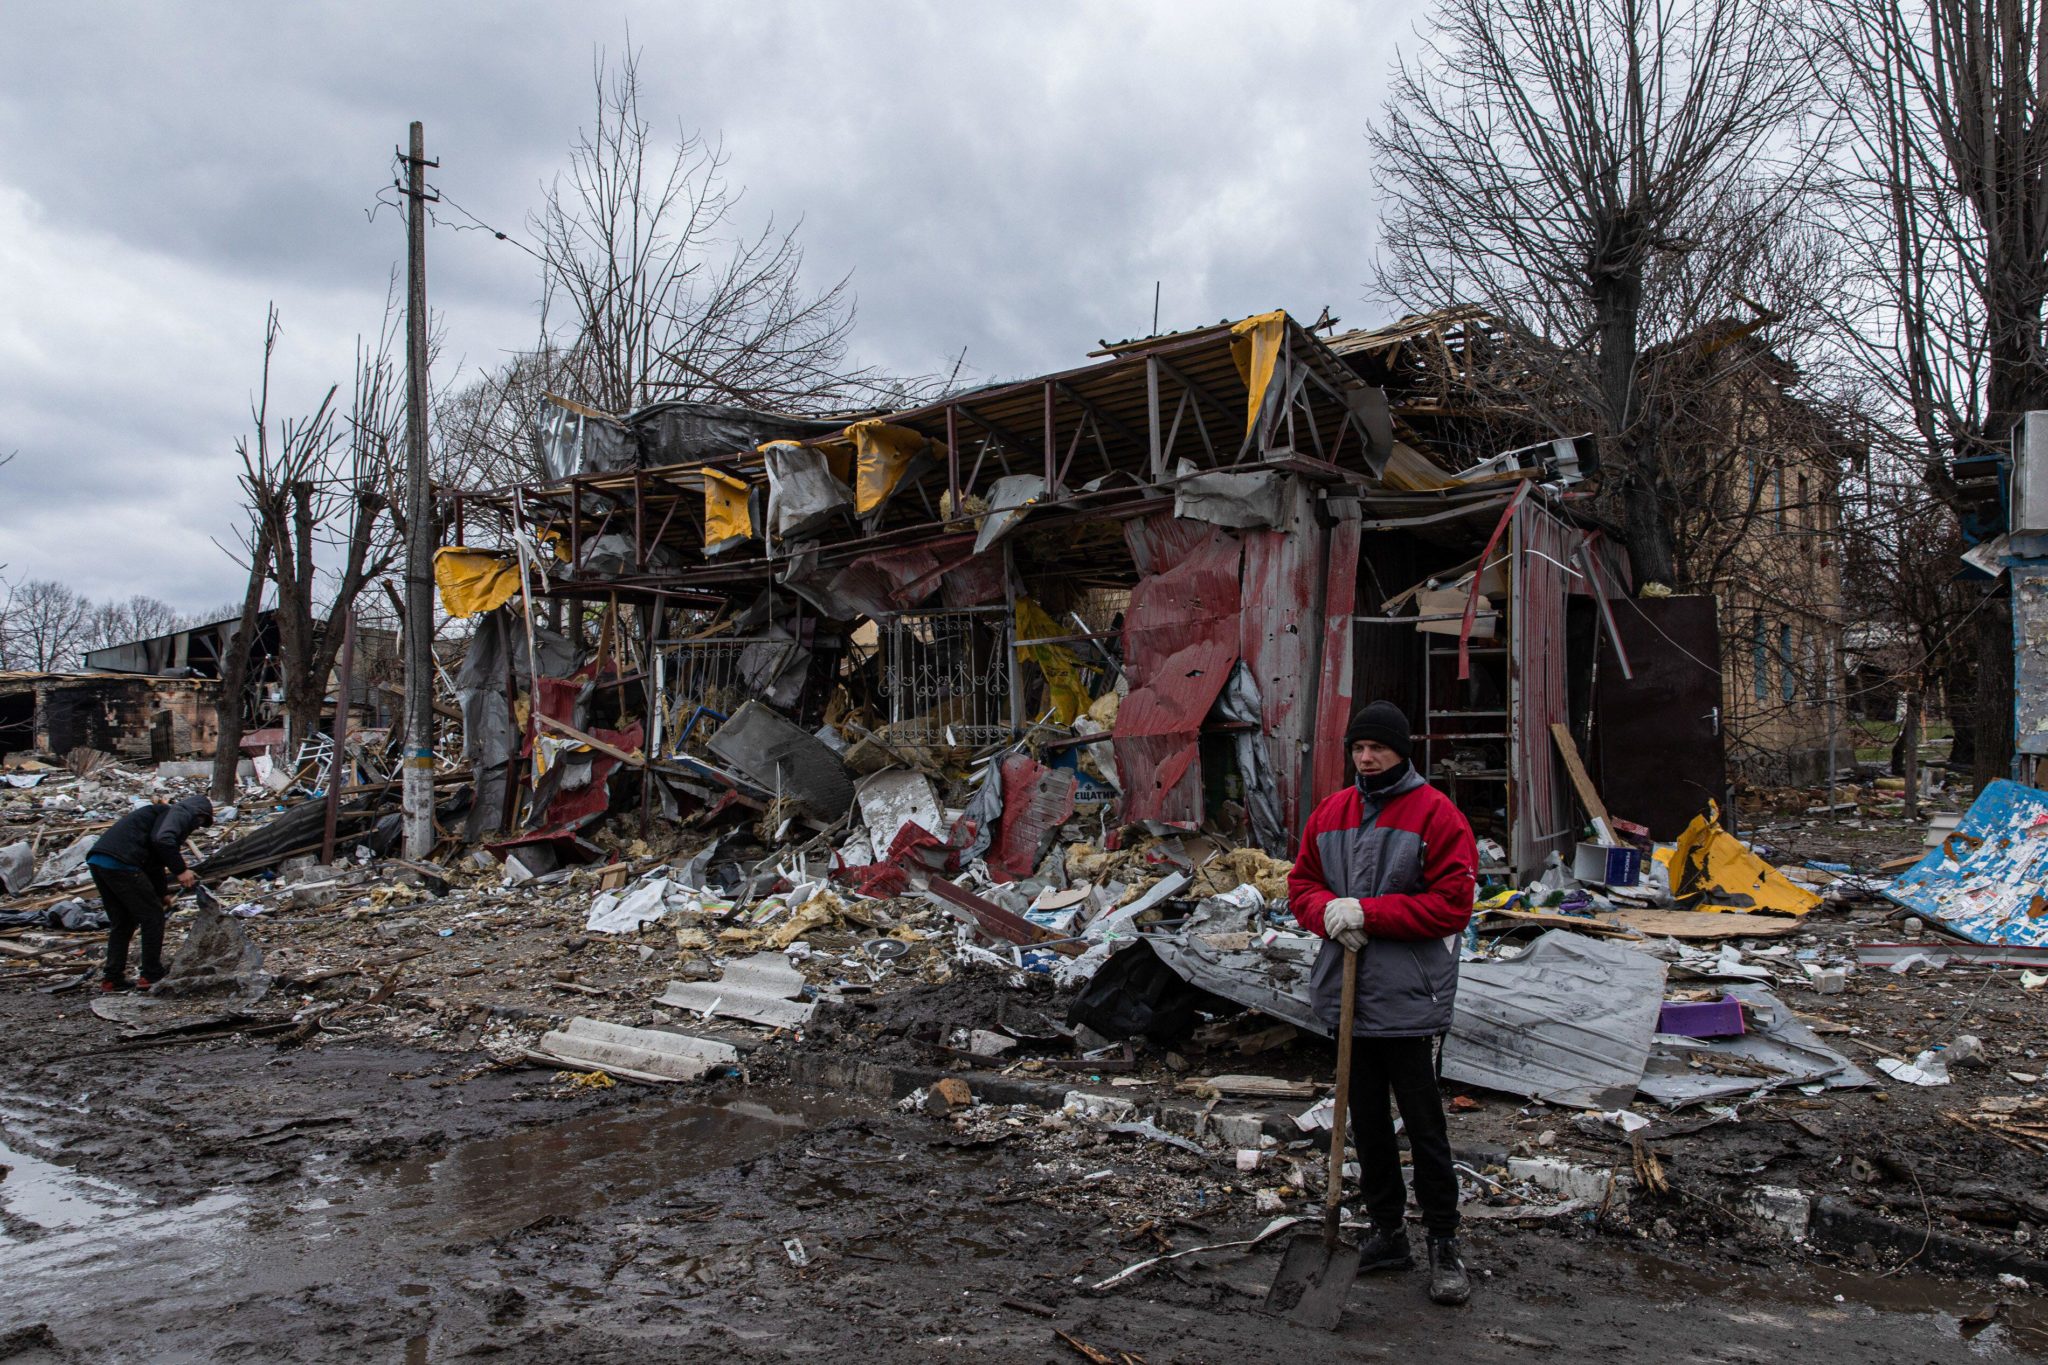 Residents cleaning up rubble in the city of Borodyanka, 06-04-2022. Image: Sipa USA/Alamy Live News